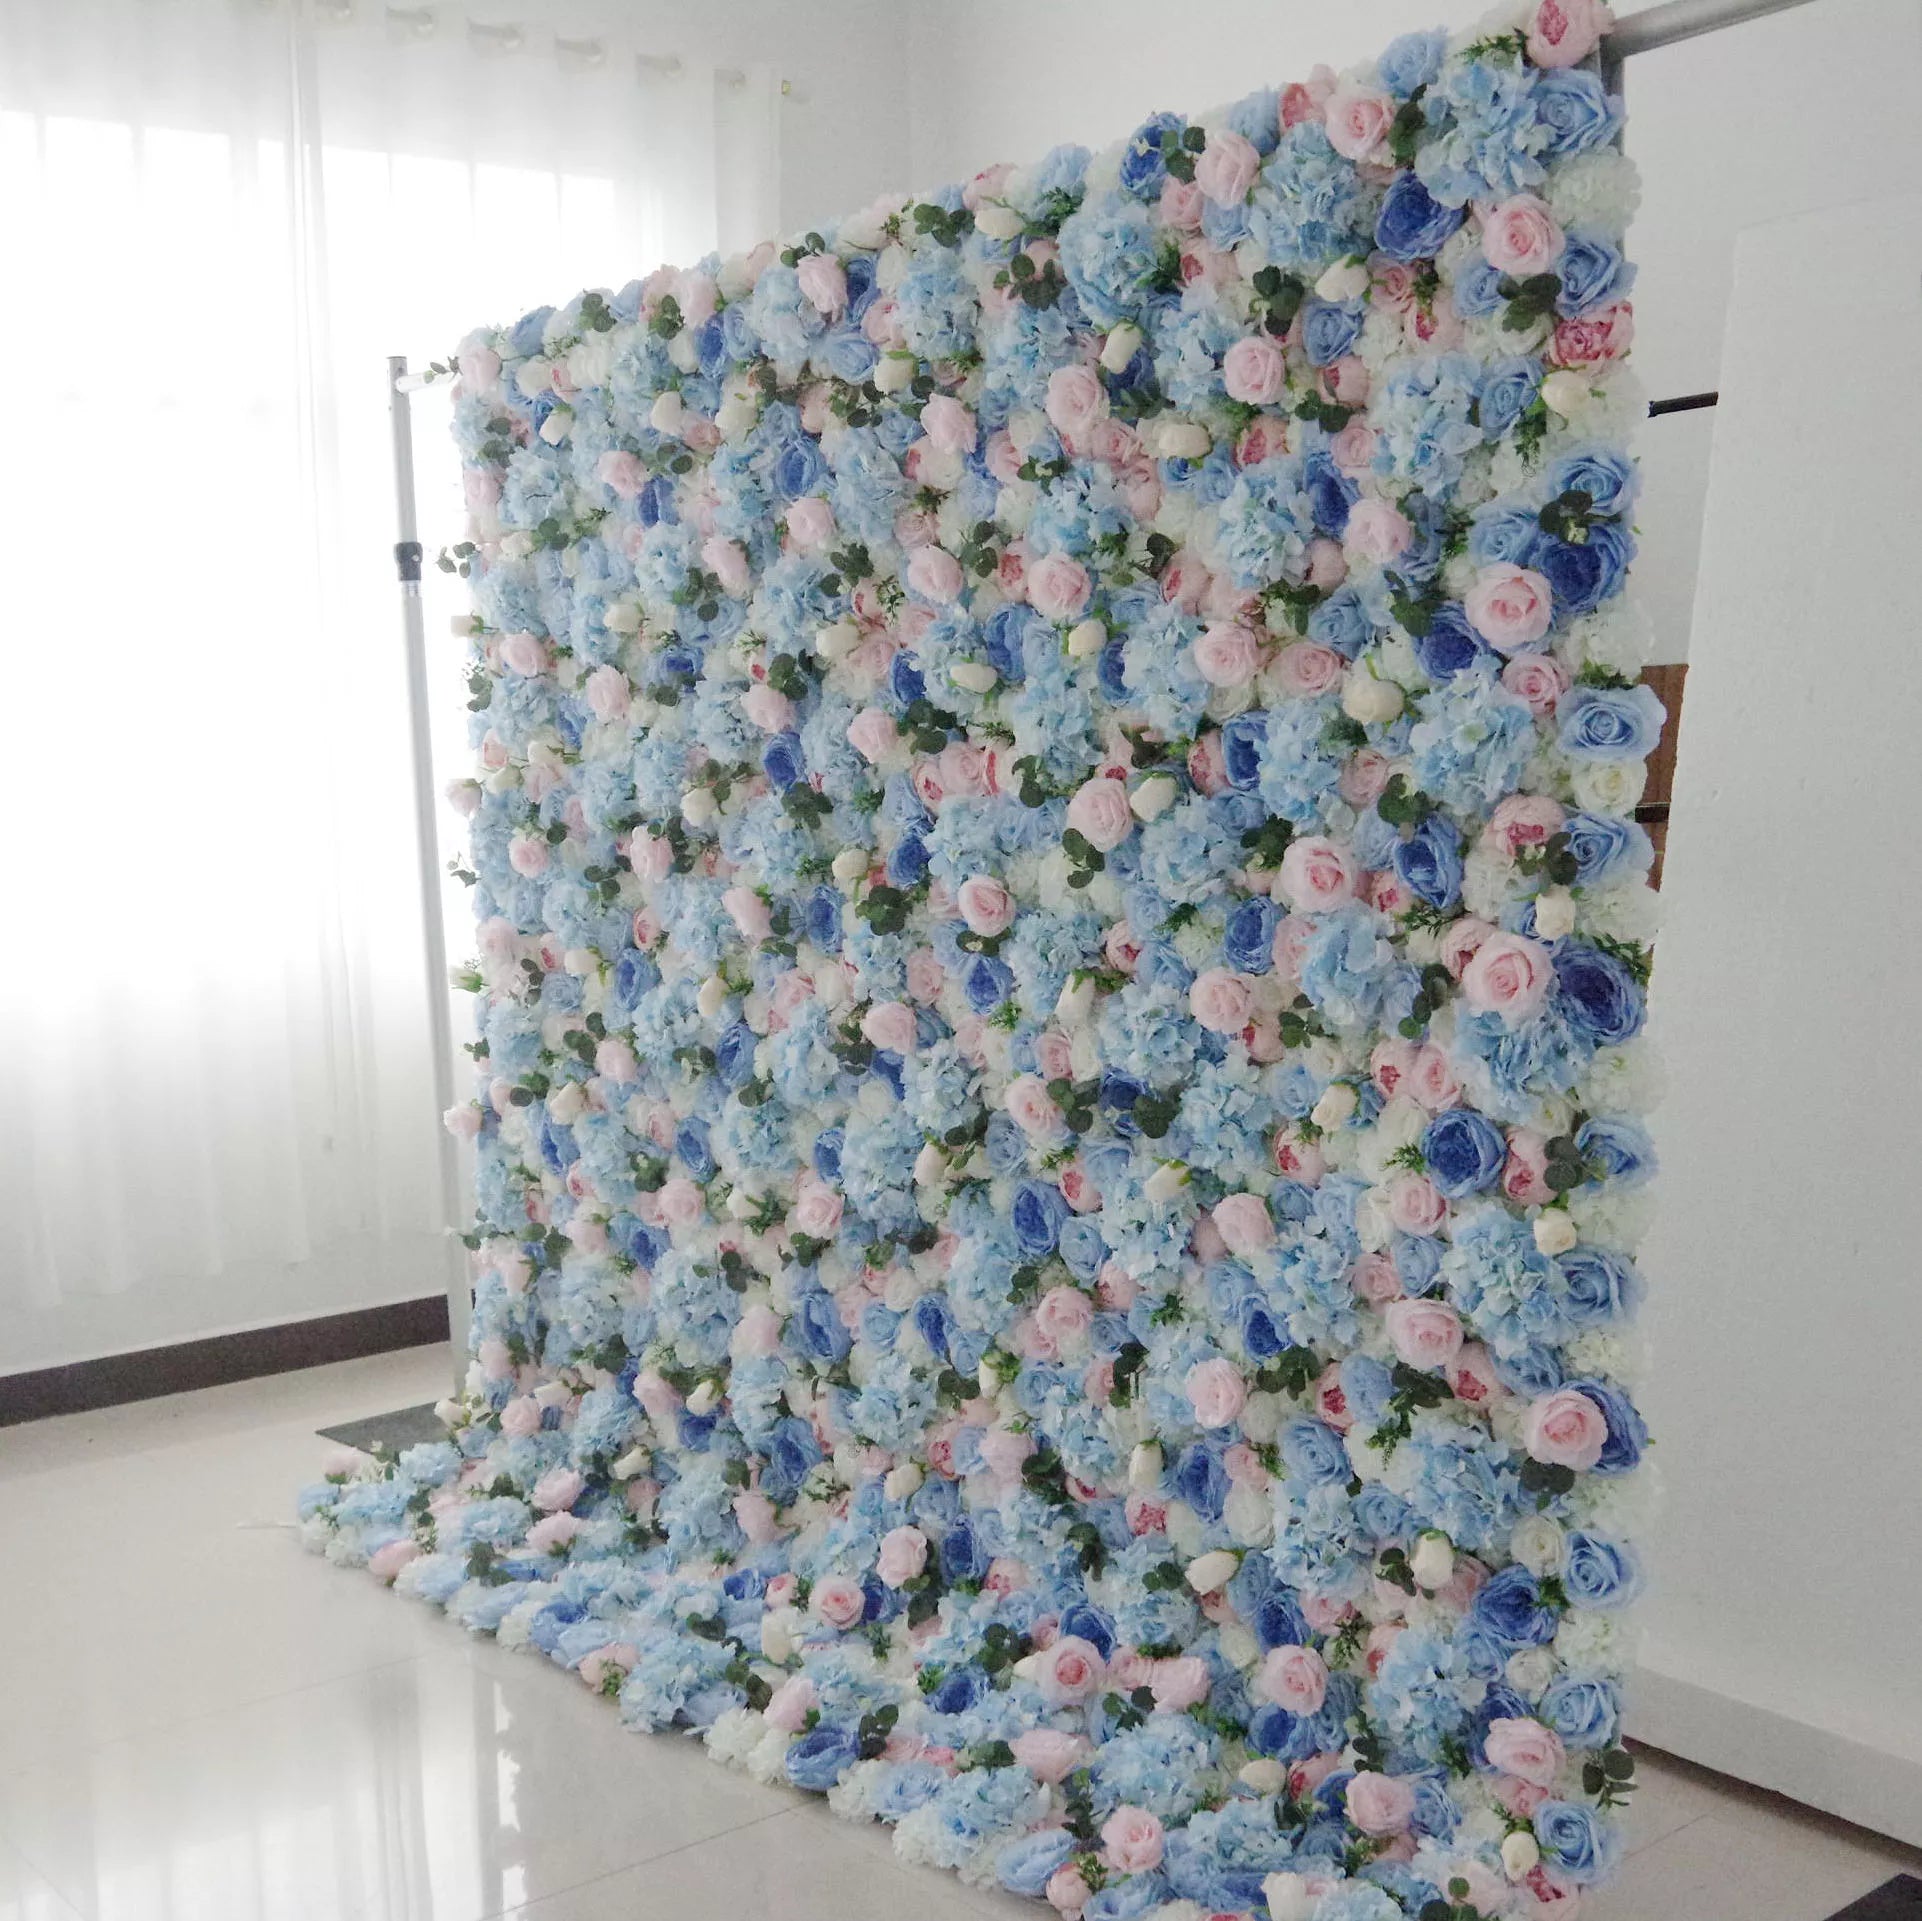 Valar Flowers Roll Up Fabric Artificial Mixed Baby Blue, Pinky and White Floral Wall Wedding Backdrop, Floral Party Decor, Event Photography-VF-081